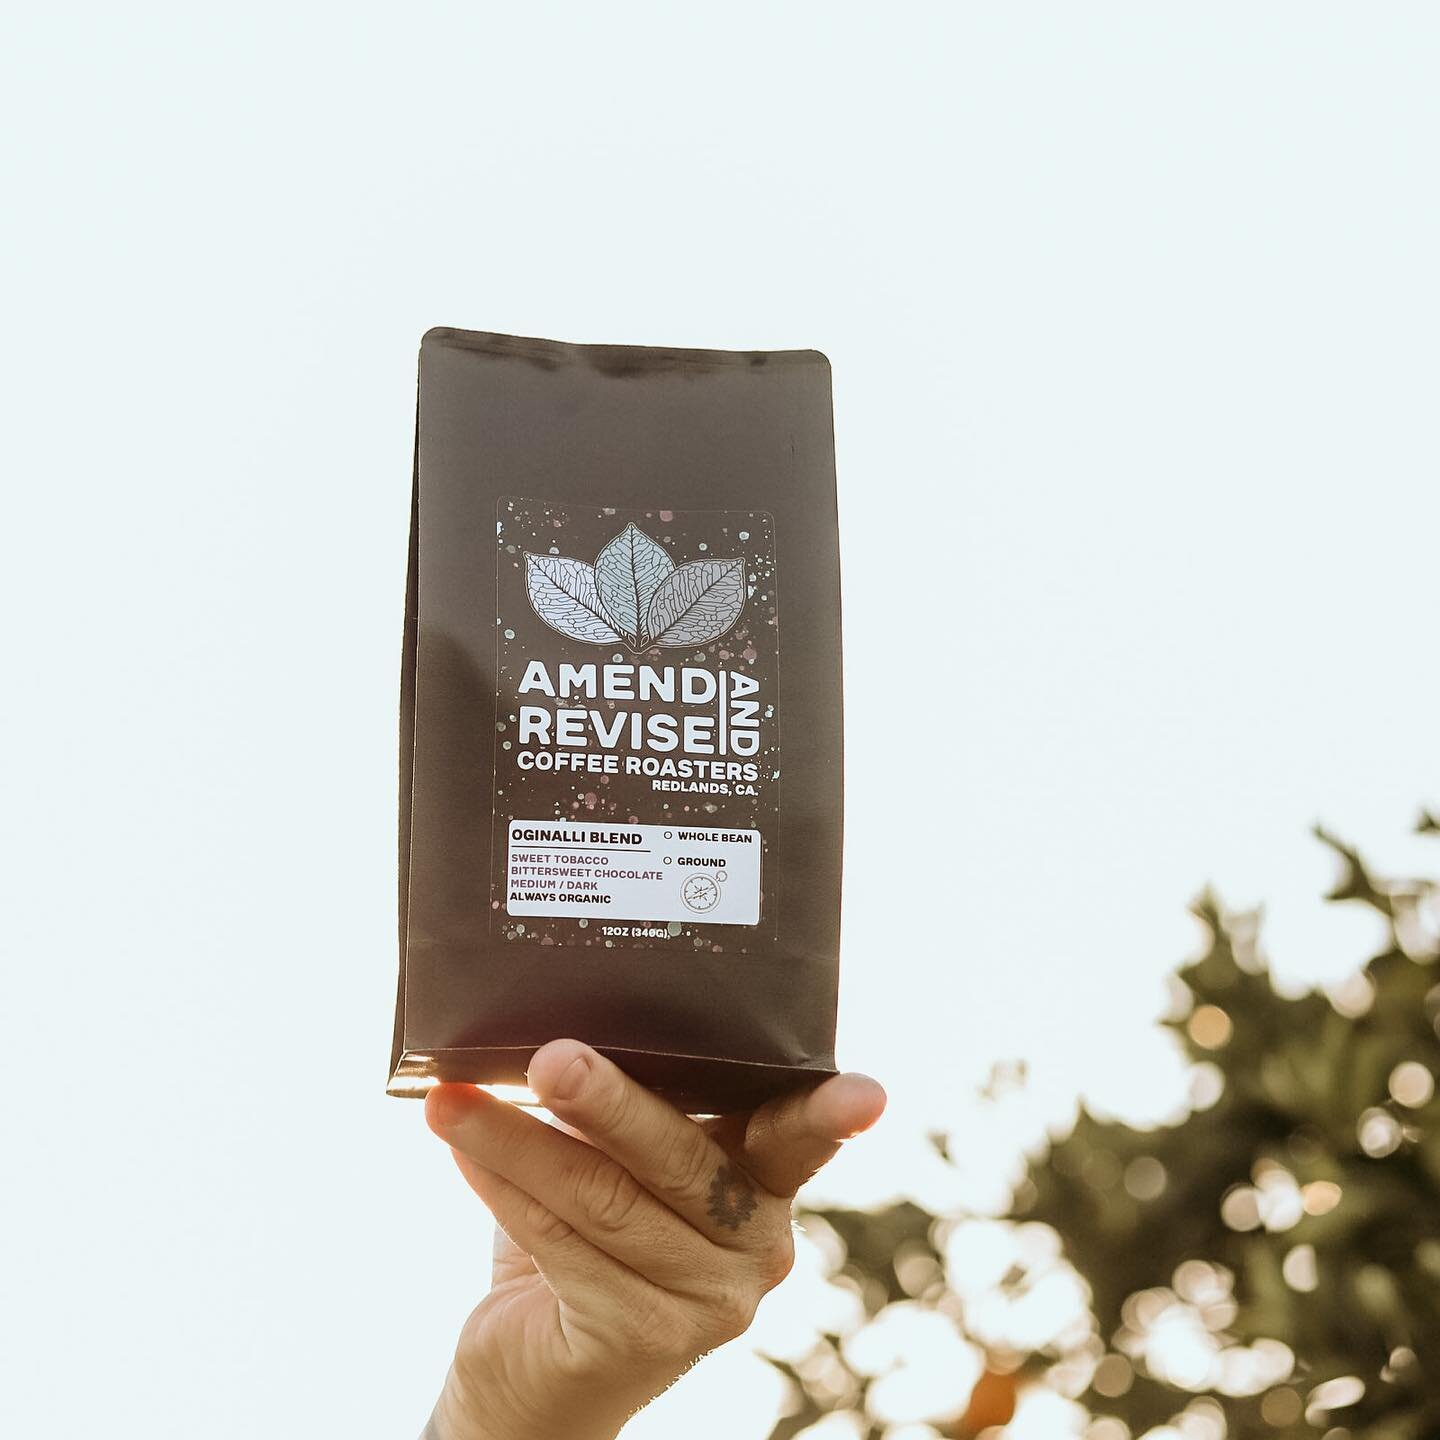 Why the funny name?

Oginalli means &ldquo;My Friend&rdquo; in Cherokee. At A&amp;R Coffee Roasters, we believe small changes can make all the difference when it comes to roasting great coffee. Similarly, when taking a moment to personally examine on